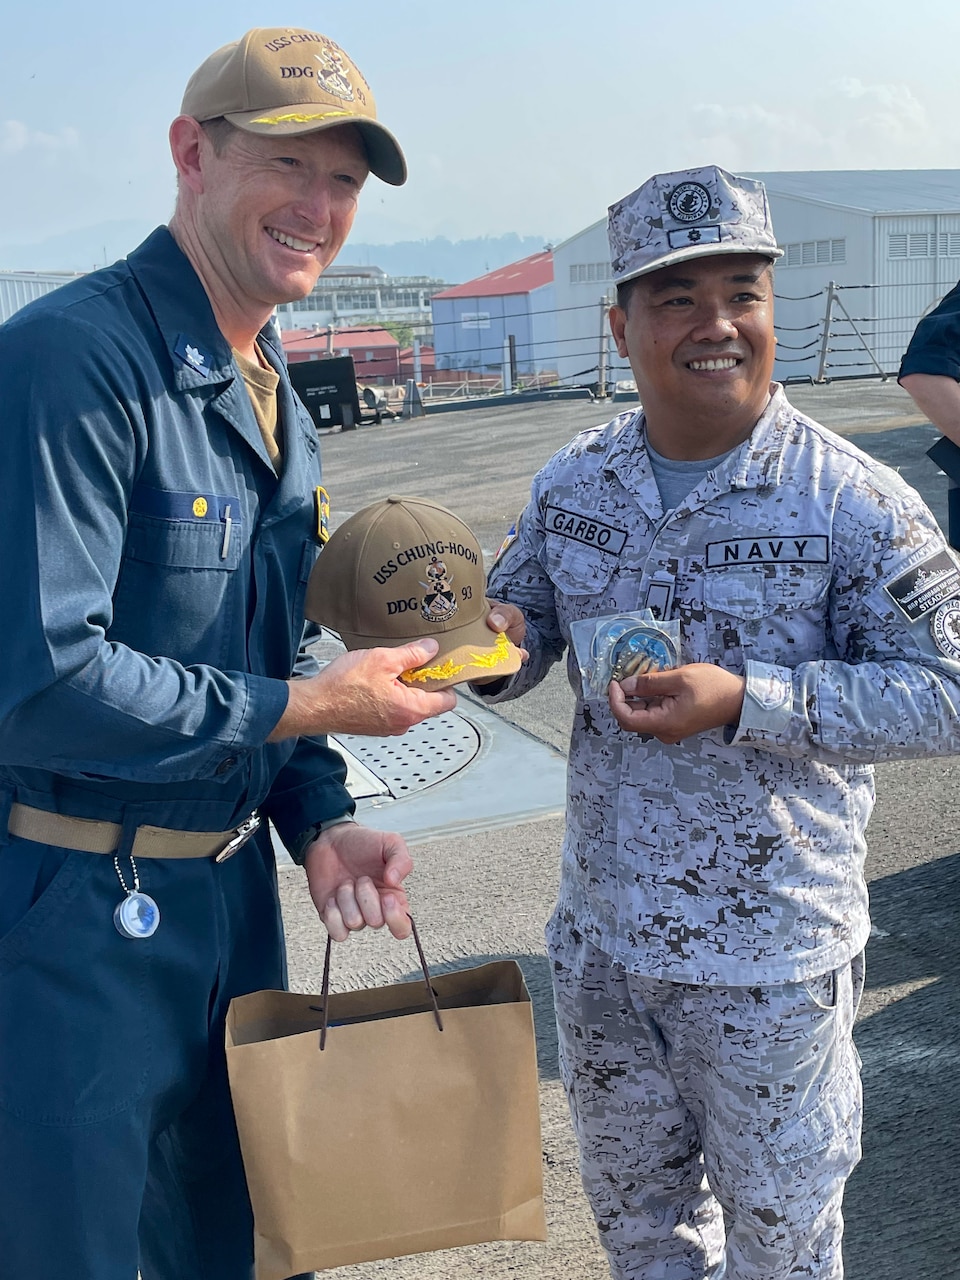 SUBIC BAY, Philippines (April 17, 2023) Commanding Officer of the Arleigh Burke-class guided-missile destroyer USS Chung-Hoon (DDG 93), Cmdr. Kevin Schaeffer exchanges gifts with Philippine Navy Operations Officer Lt. Cmdr. Randy Garbo assigned to the Phoang-class corvette BRP Conrado Yap (PS 39) aboard Chung-Hoon. USS Chung-Hoon is on a routine deployment to U.S. 7th Fleet and is assigned to Commander, Task Force (CTF 71)/ Destroyer Squadron (DESRON) 15. CTF 71/DESRON 15 is the largest forward-deployed DESRON and the U.S. 7th Fleet’s principal surface force. (U.S. Navy photo by Mass Communication Specialist 1st Class Andre T. Richard)